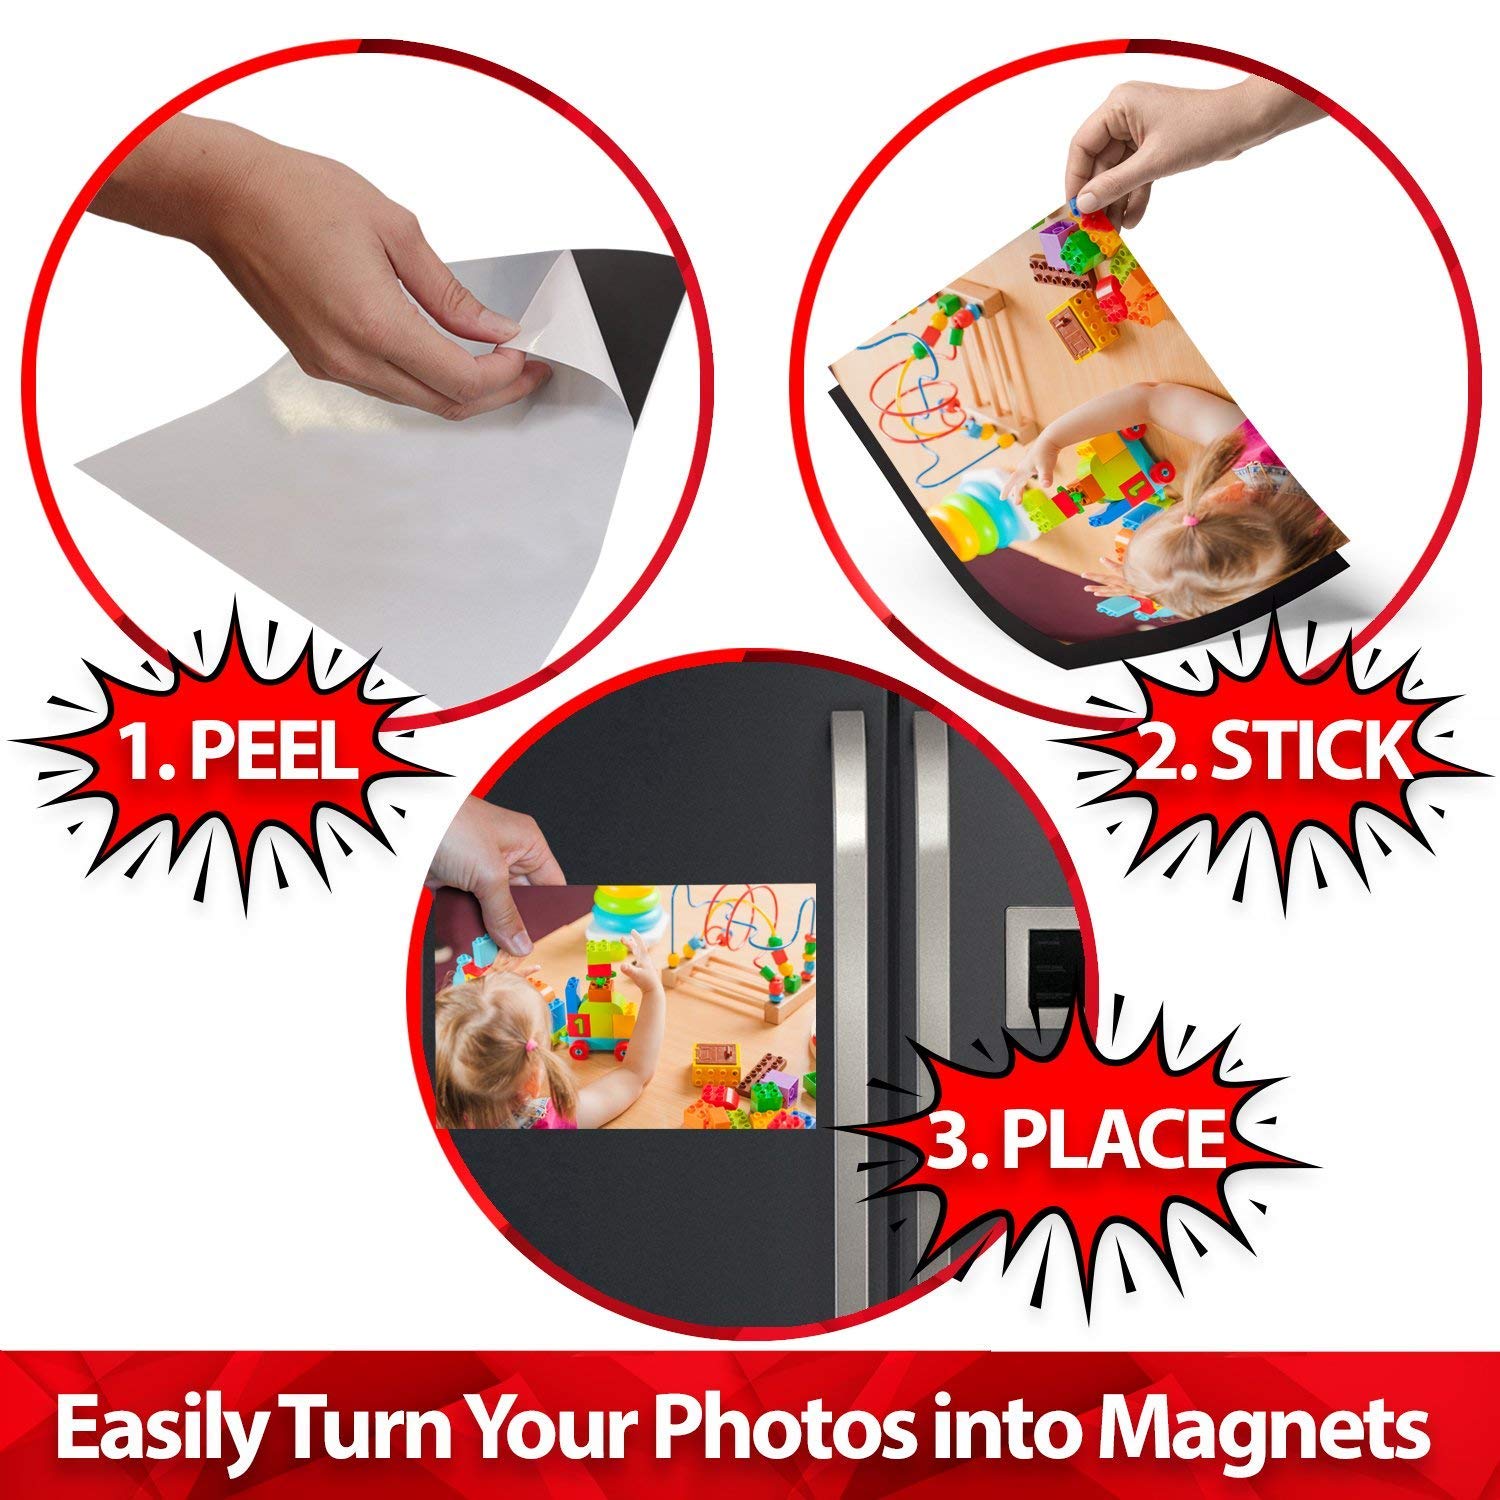 Magnetic Adhesive Sheets magnetic Sheets With Adhesive - Temu